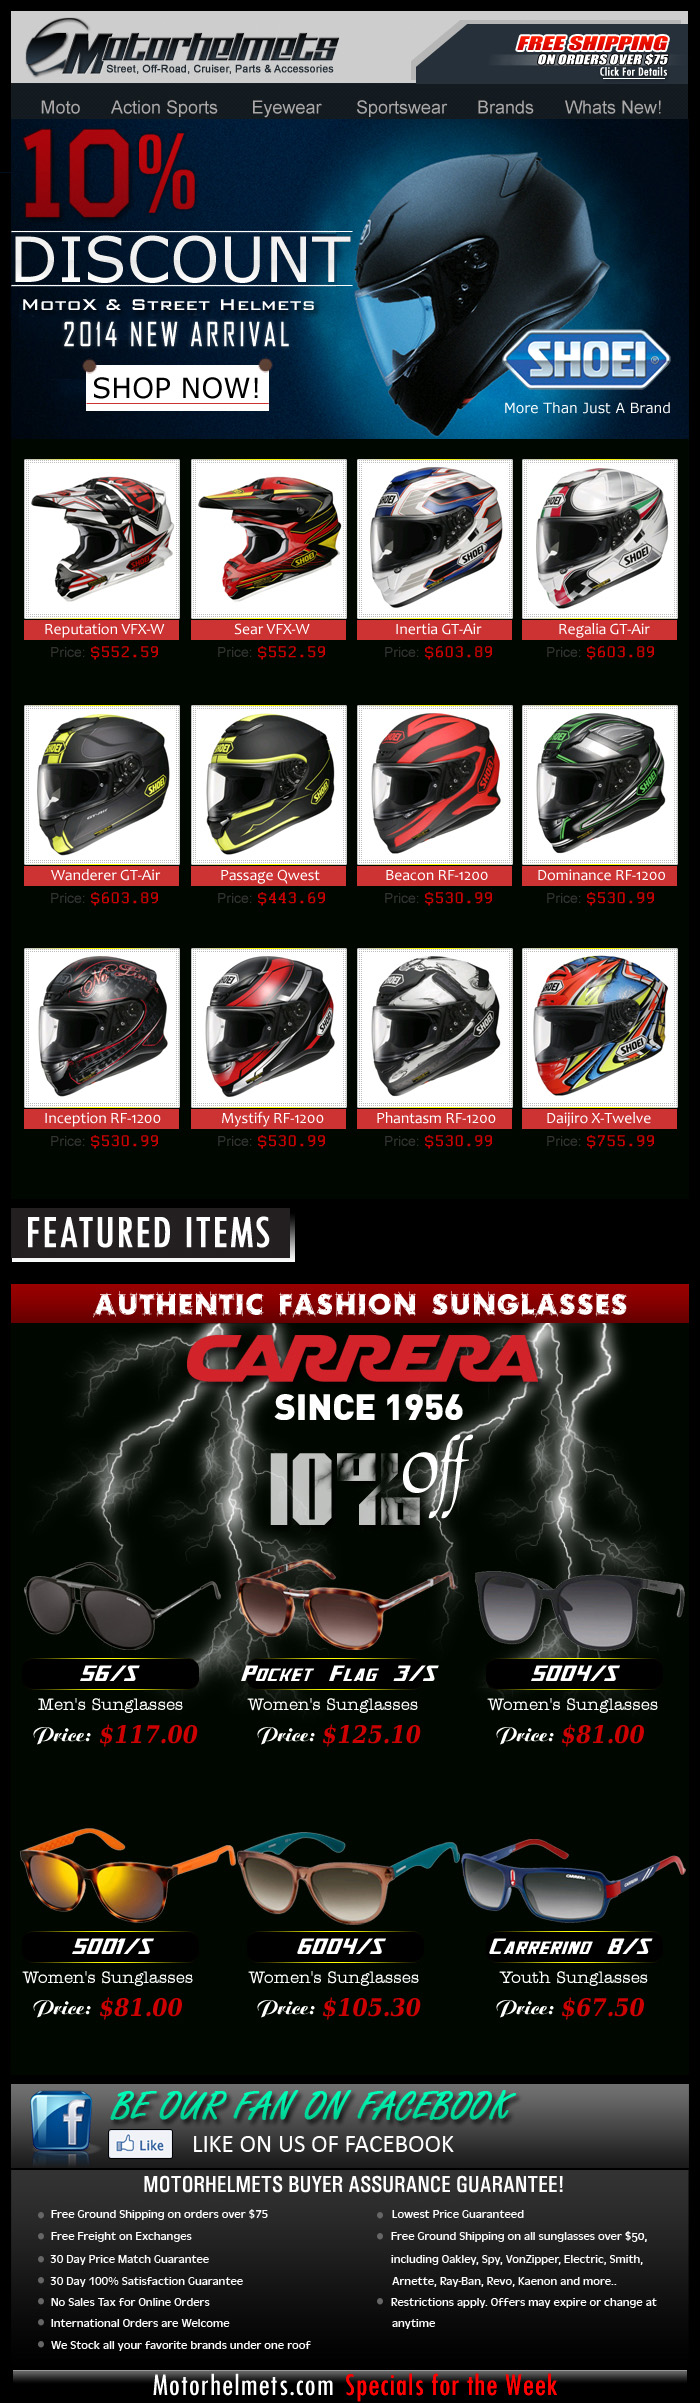 Save 10% off on every purchase of the 2014 Shoei MX & Street Helmets!